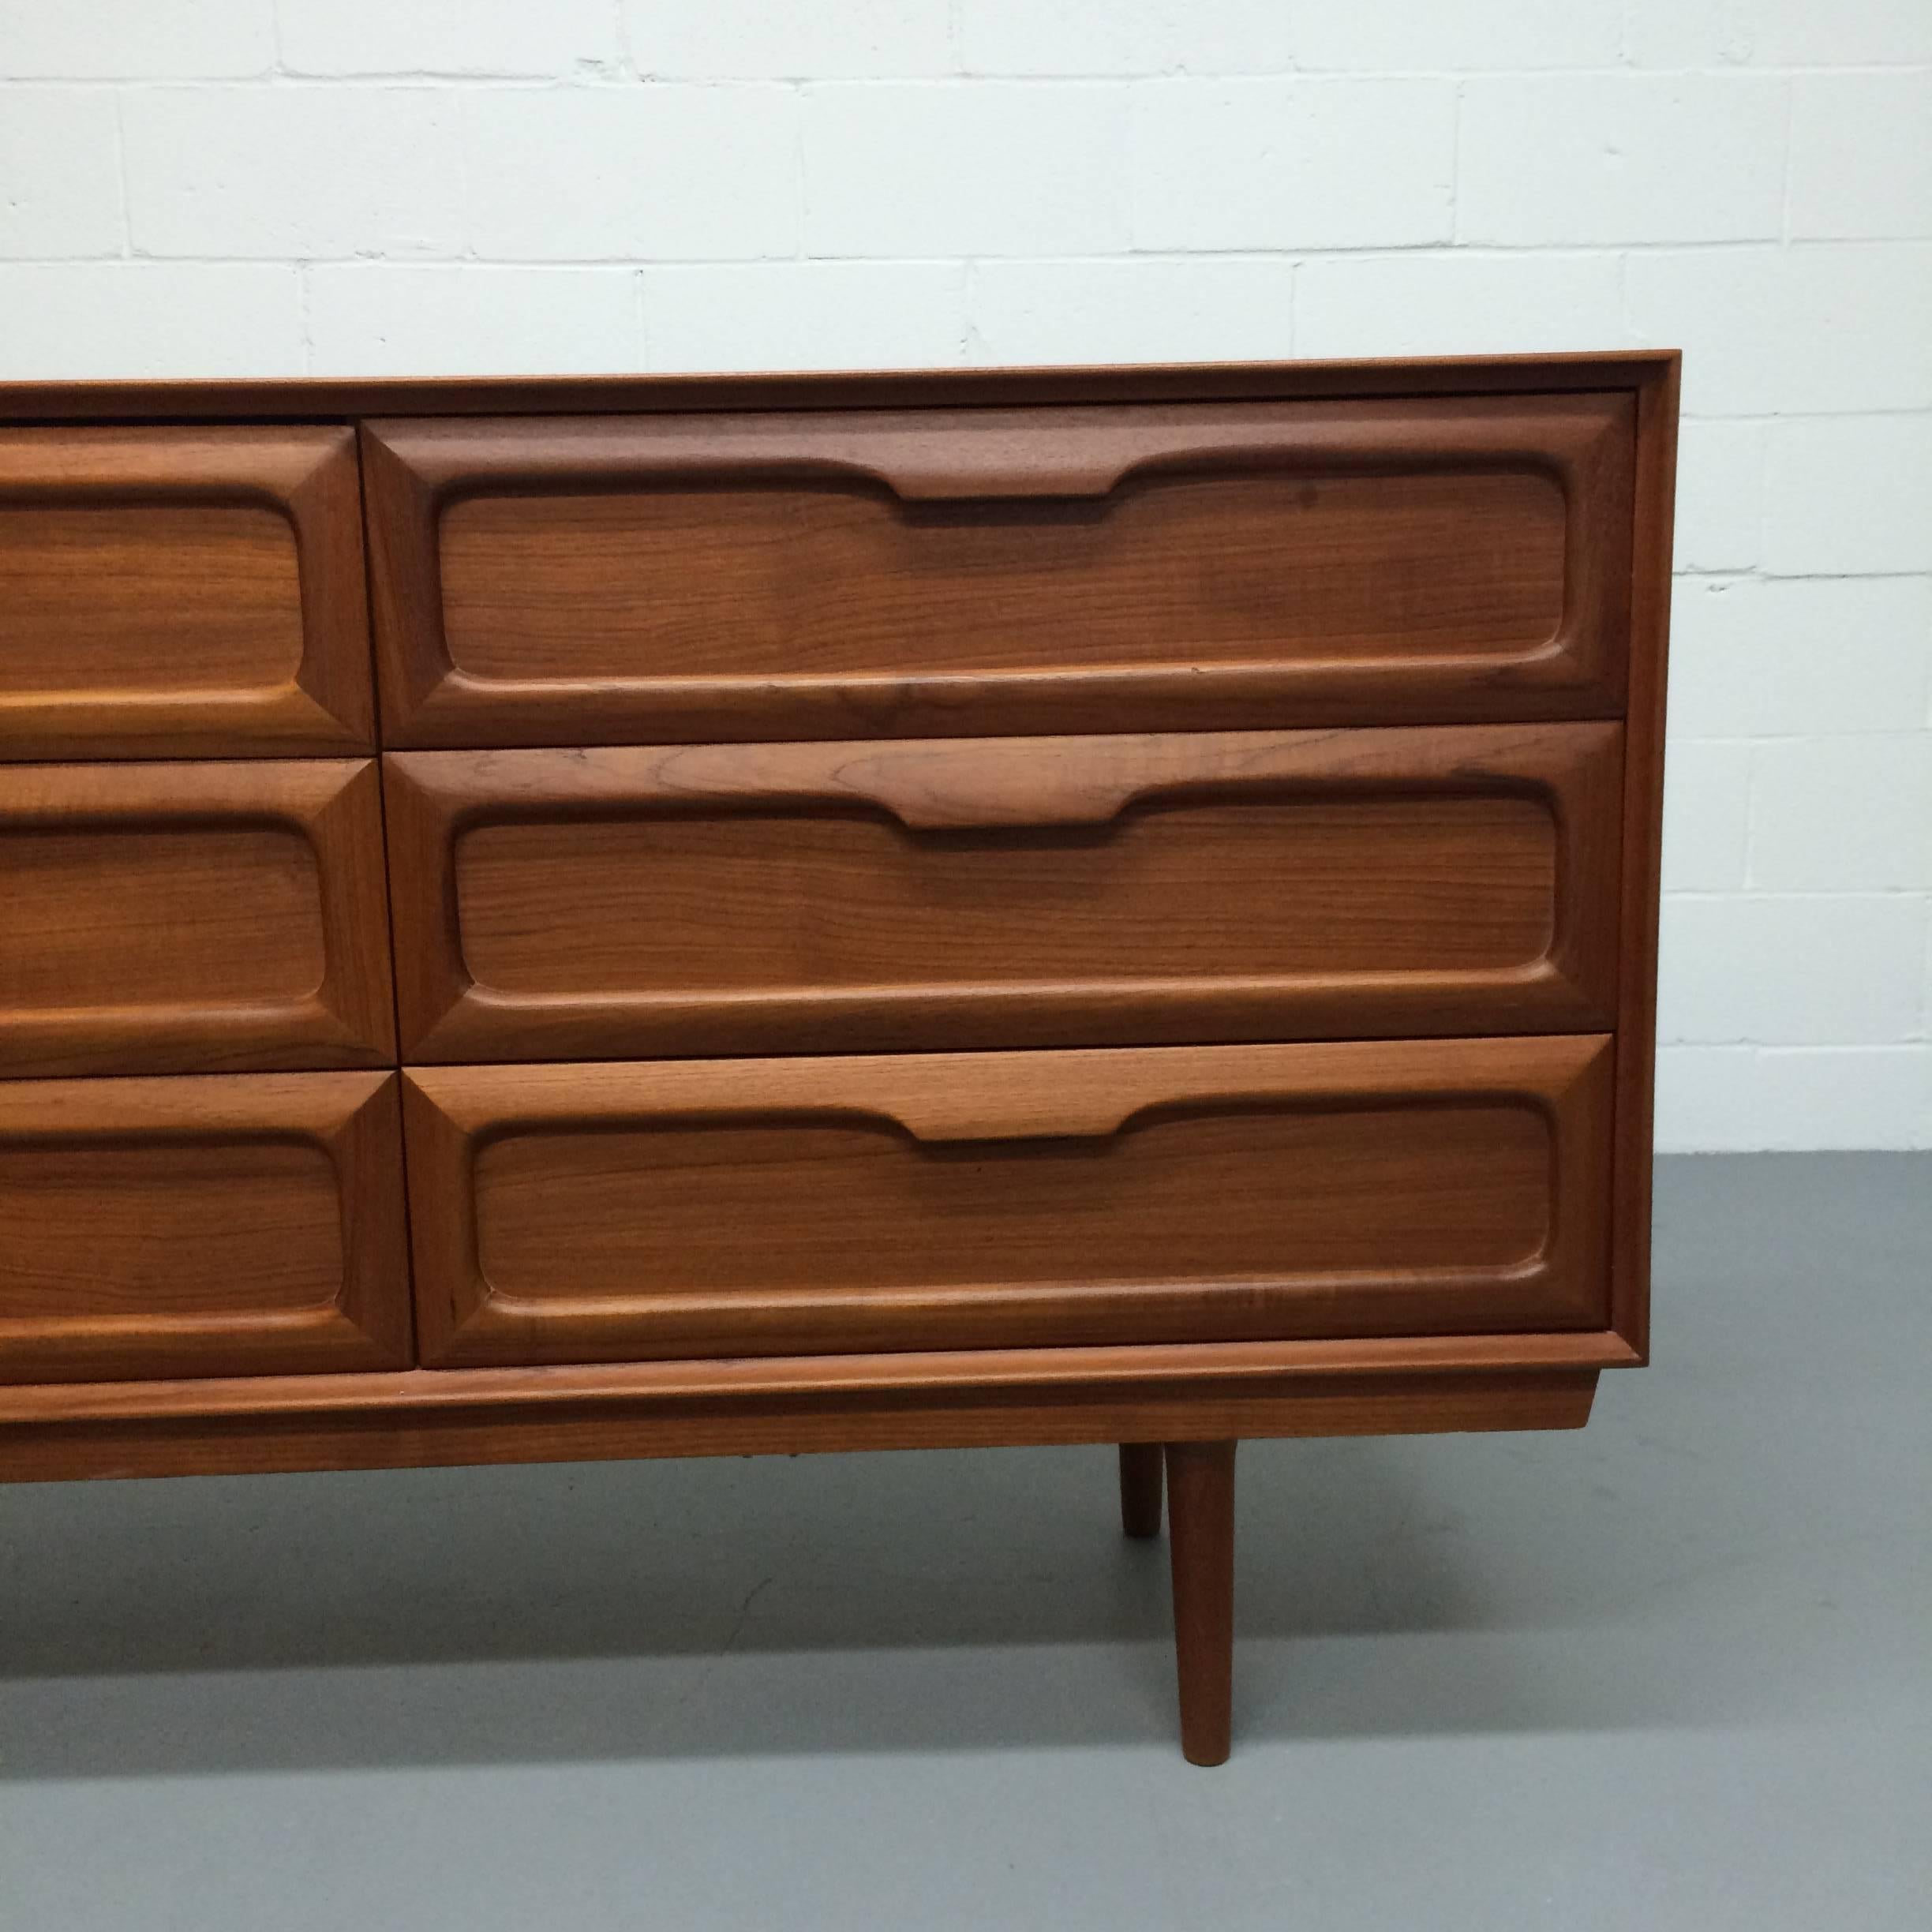 A wonderful Mid-Century Modern long dresser/ credenza/ sideboard made of teak. This piece, which has had only one owner, was purchased in 1963. It is in very good condition with minor age appropriate wear. There are nine drawers, three of which have